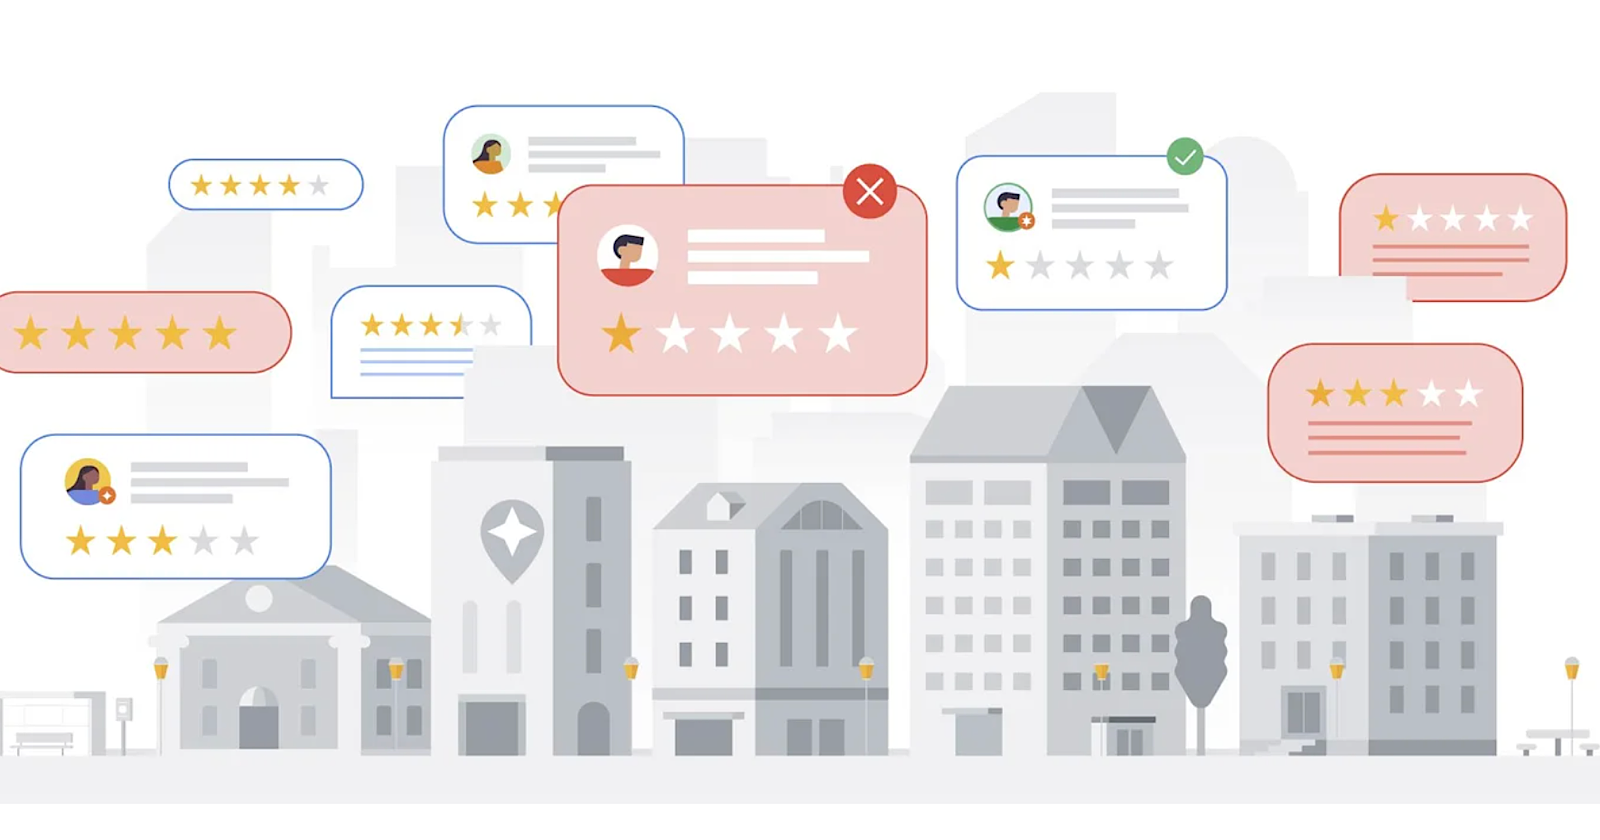 Google Uses AI To Detect Fake Online Reviews Faster